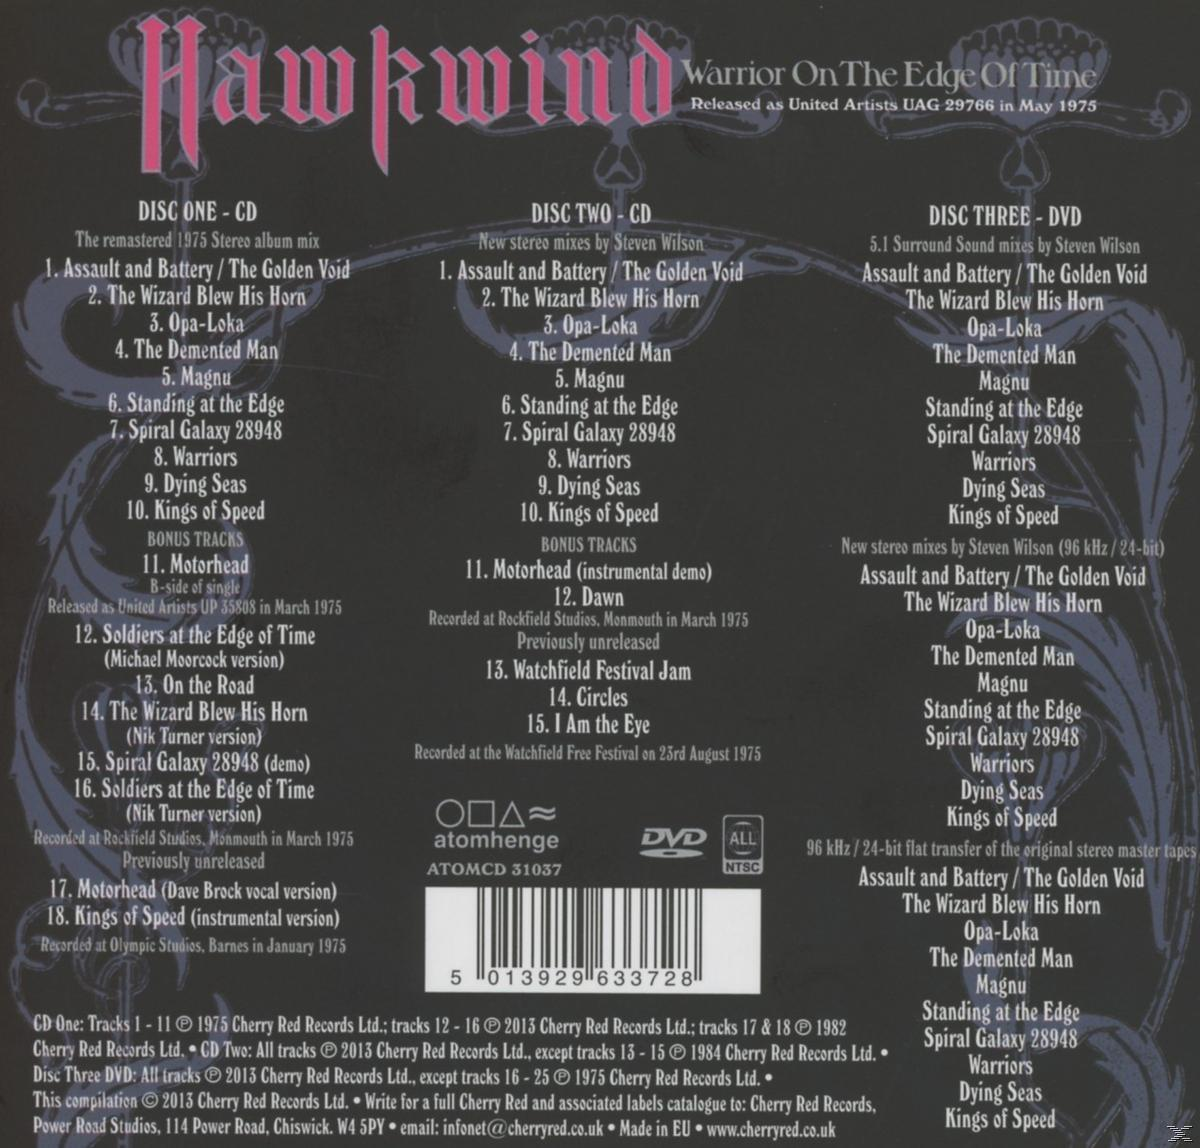 Edge - + Edition) (Deluxe Video) The Warrior Hawkwind On - DVD Time (CD Of